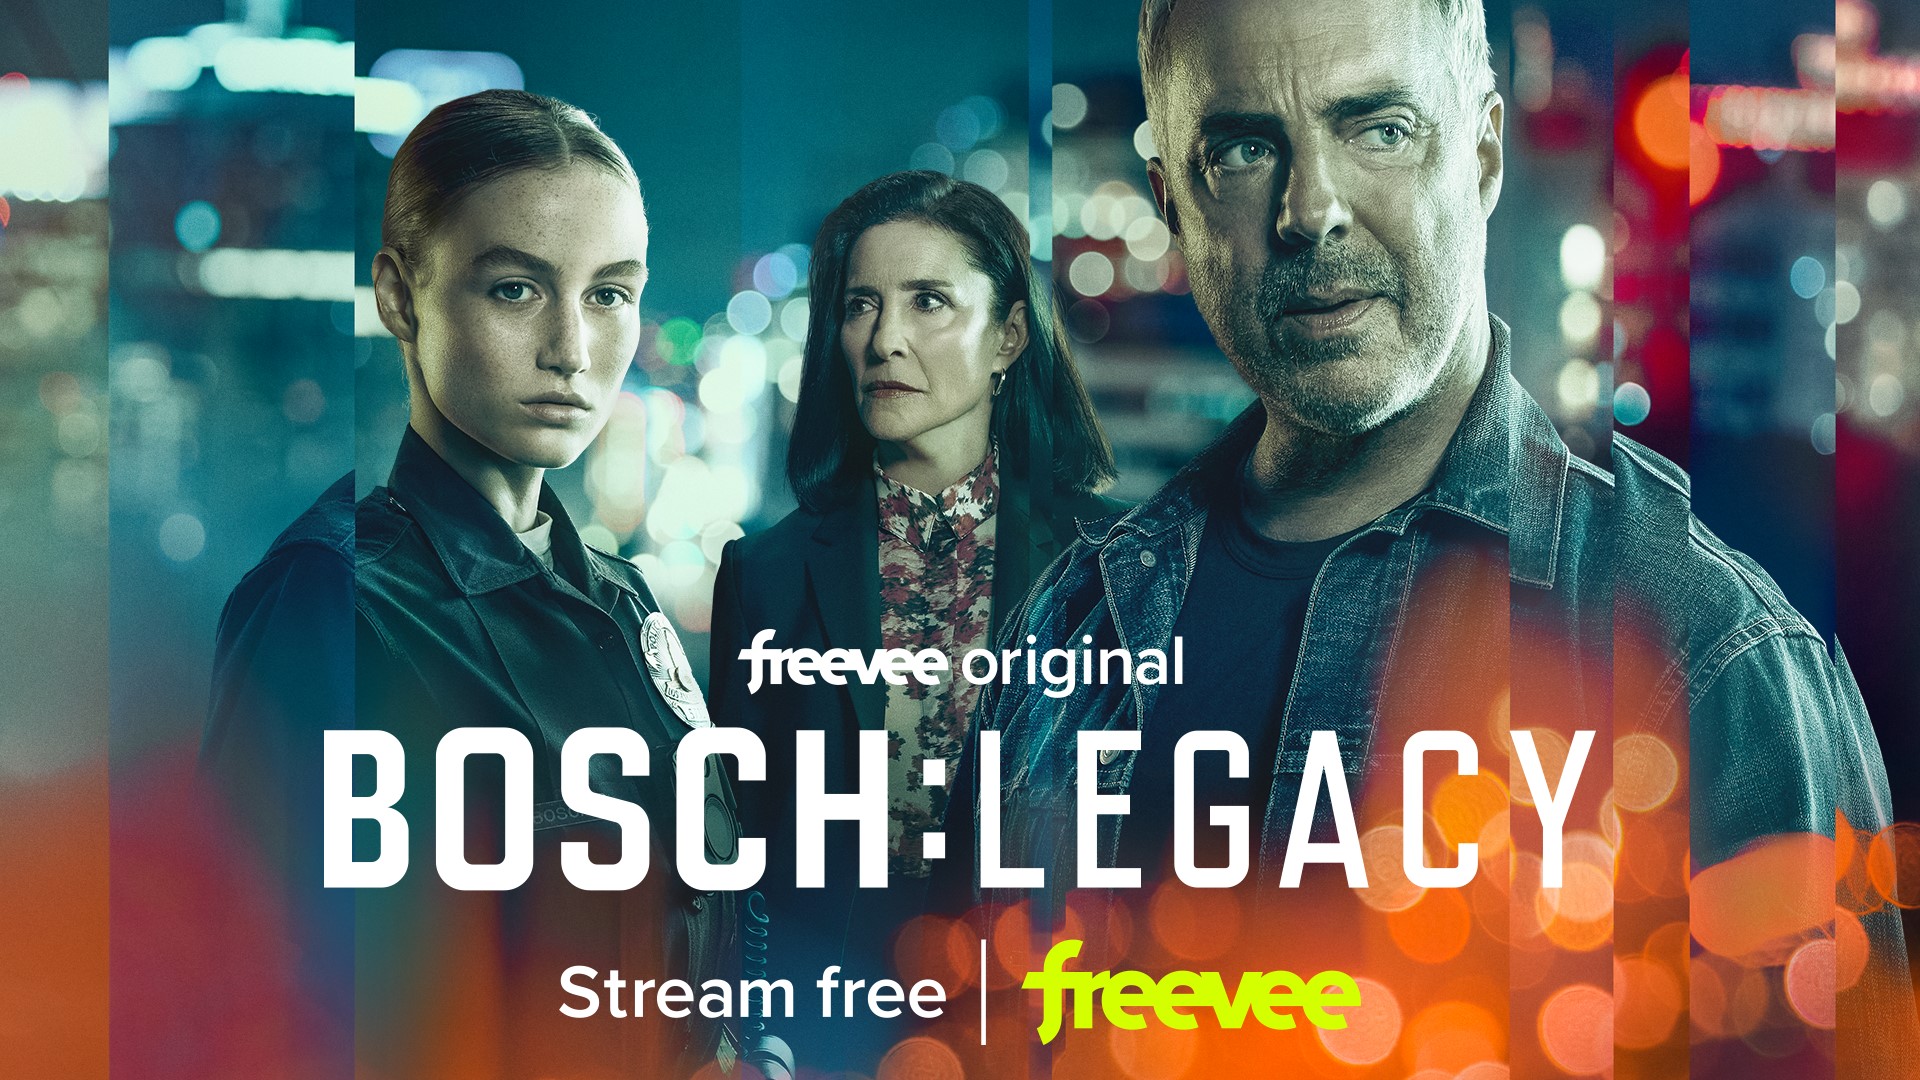 Bosch: Legacy — next episode and everything we know